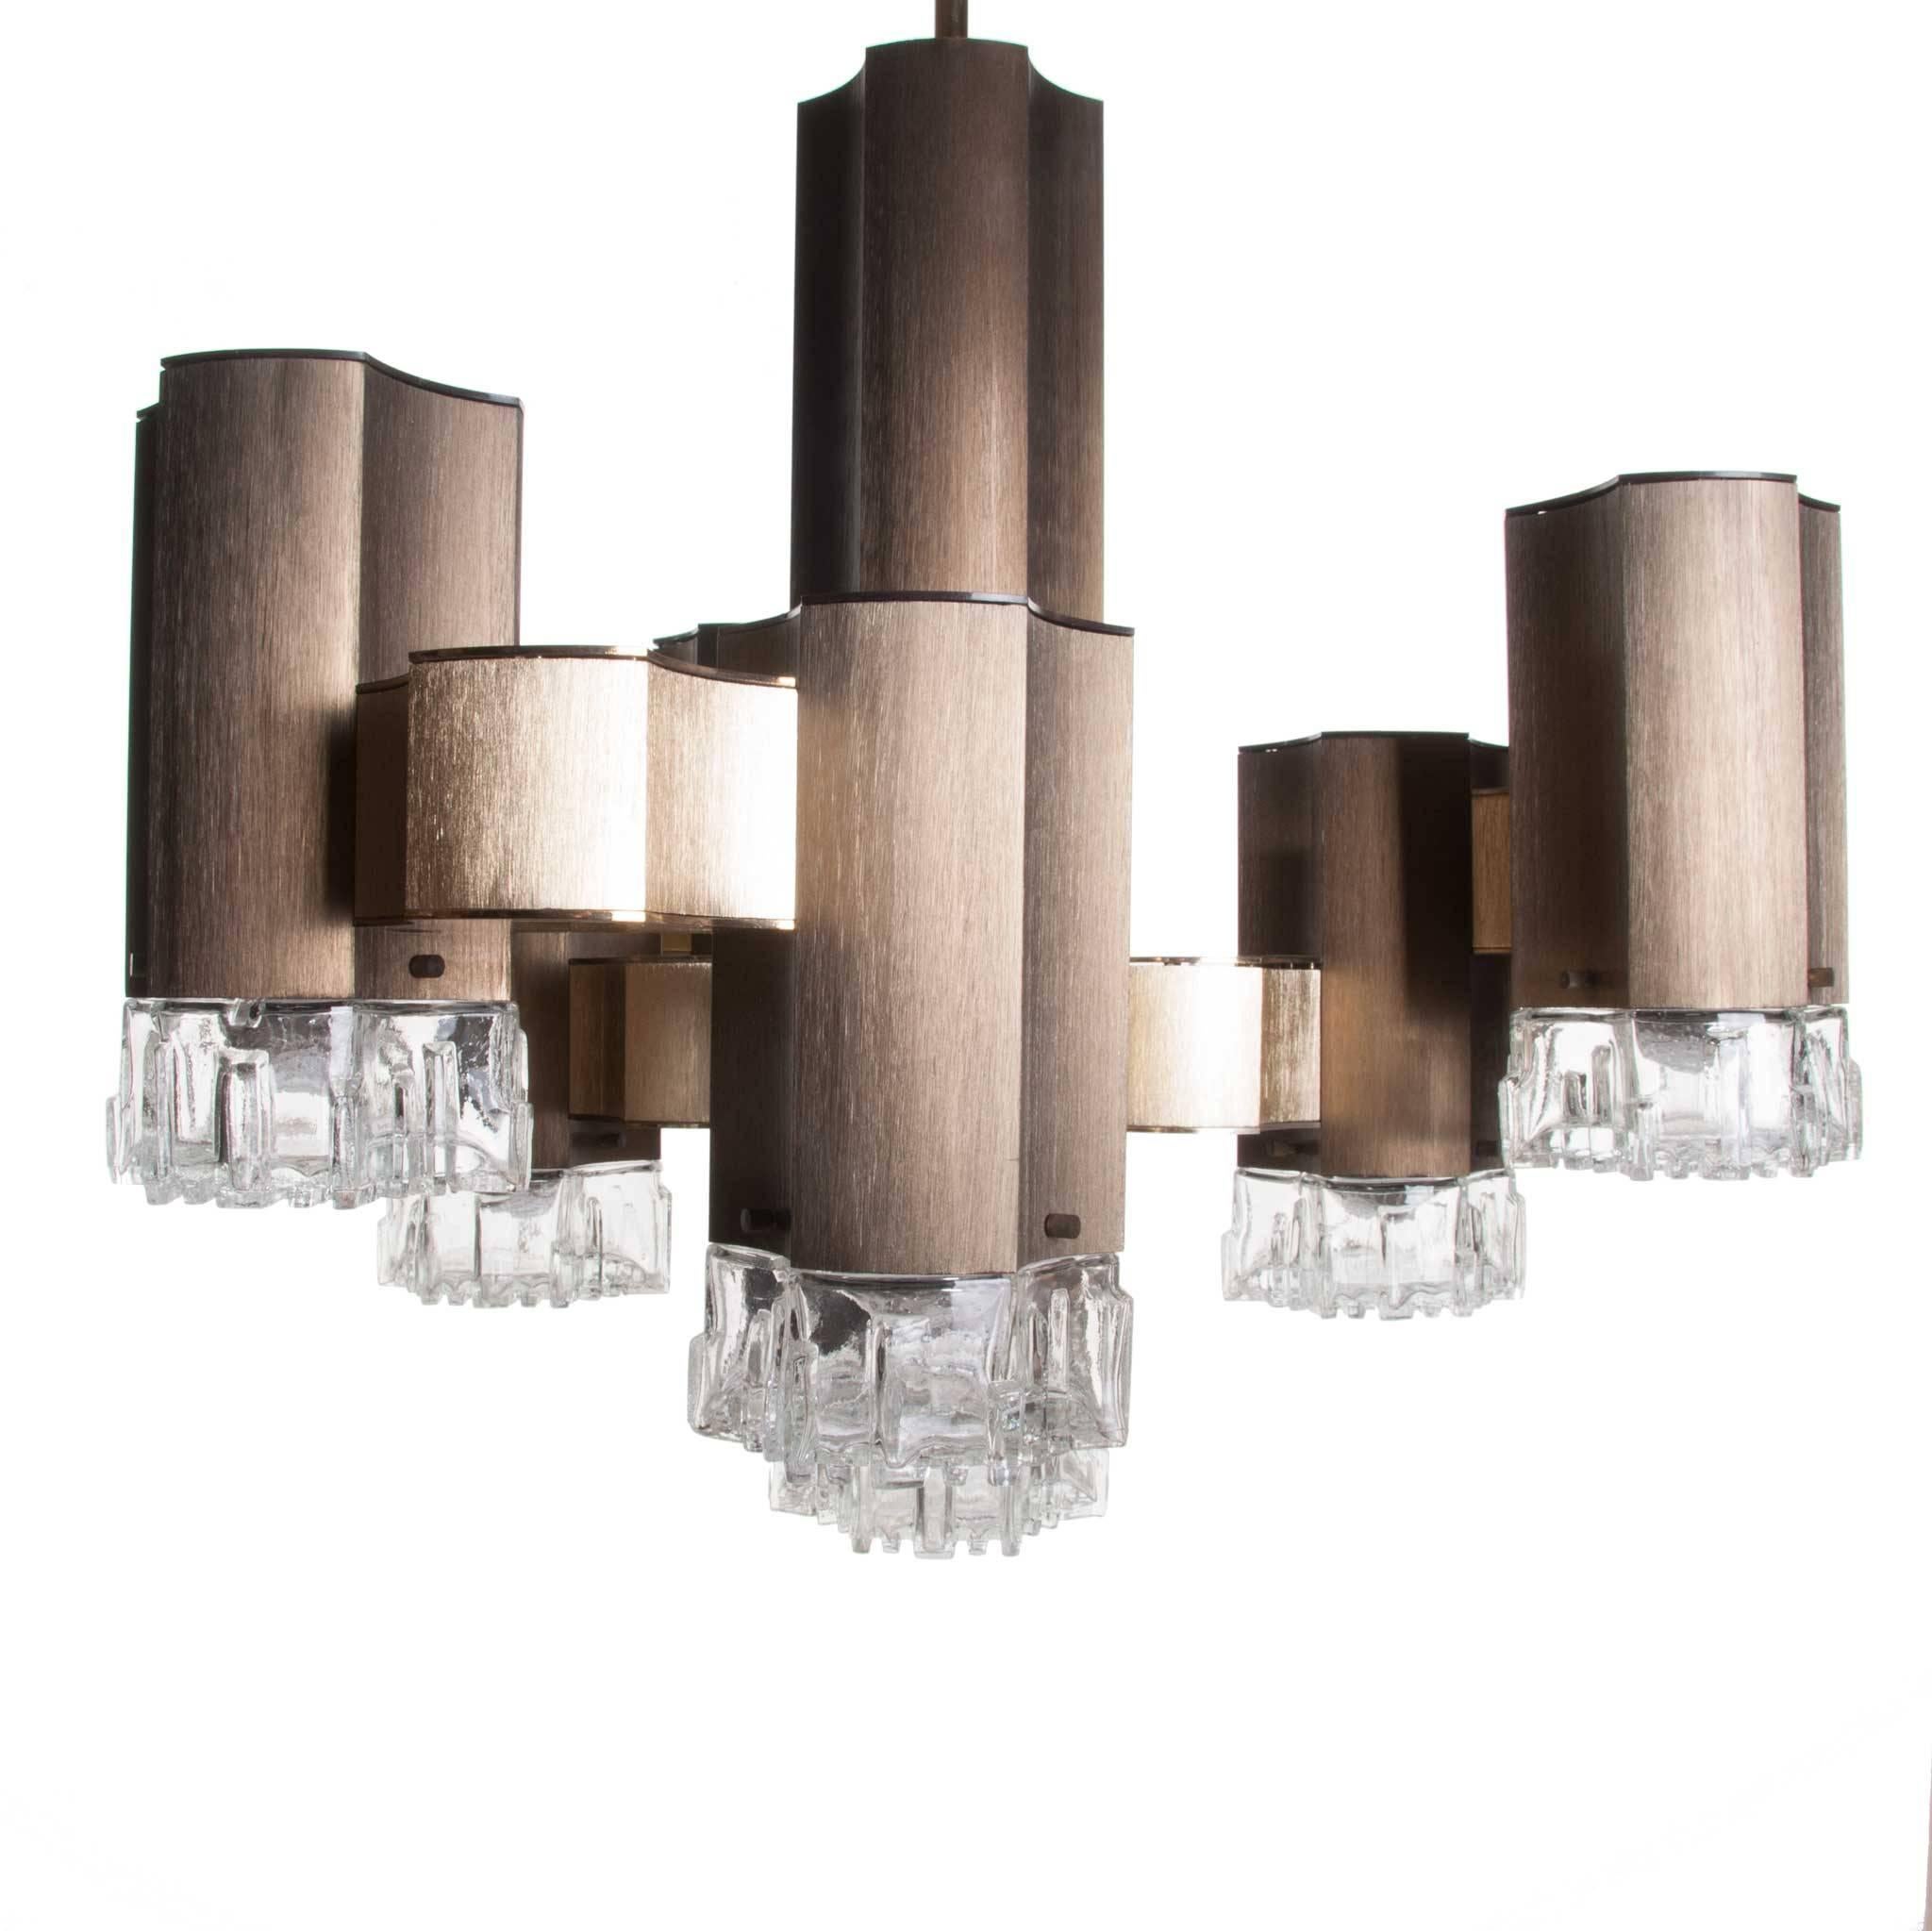 Beautiful chandelier with seven individual lights on three geometric polished and matte gold aluminium arms. Gaetano Sciolari was one of Italy's most prominent Mid-Century designers. The cubic range is his most celebrated design.